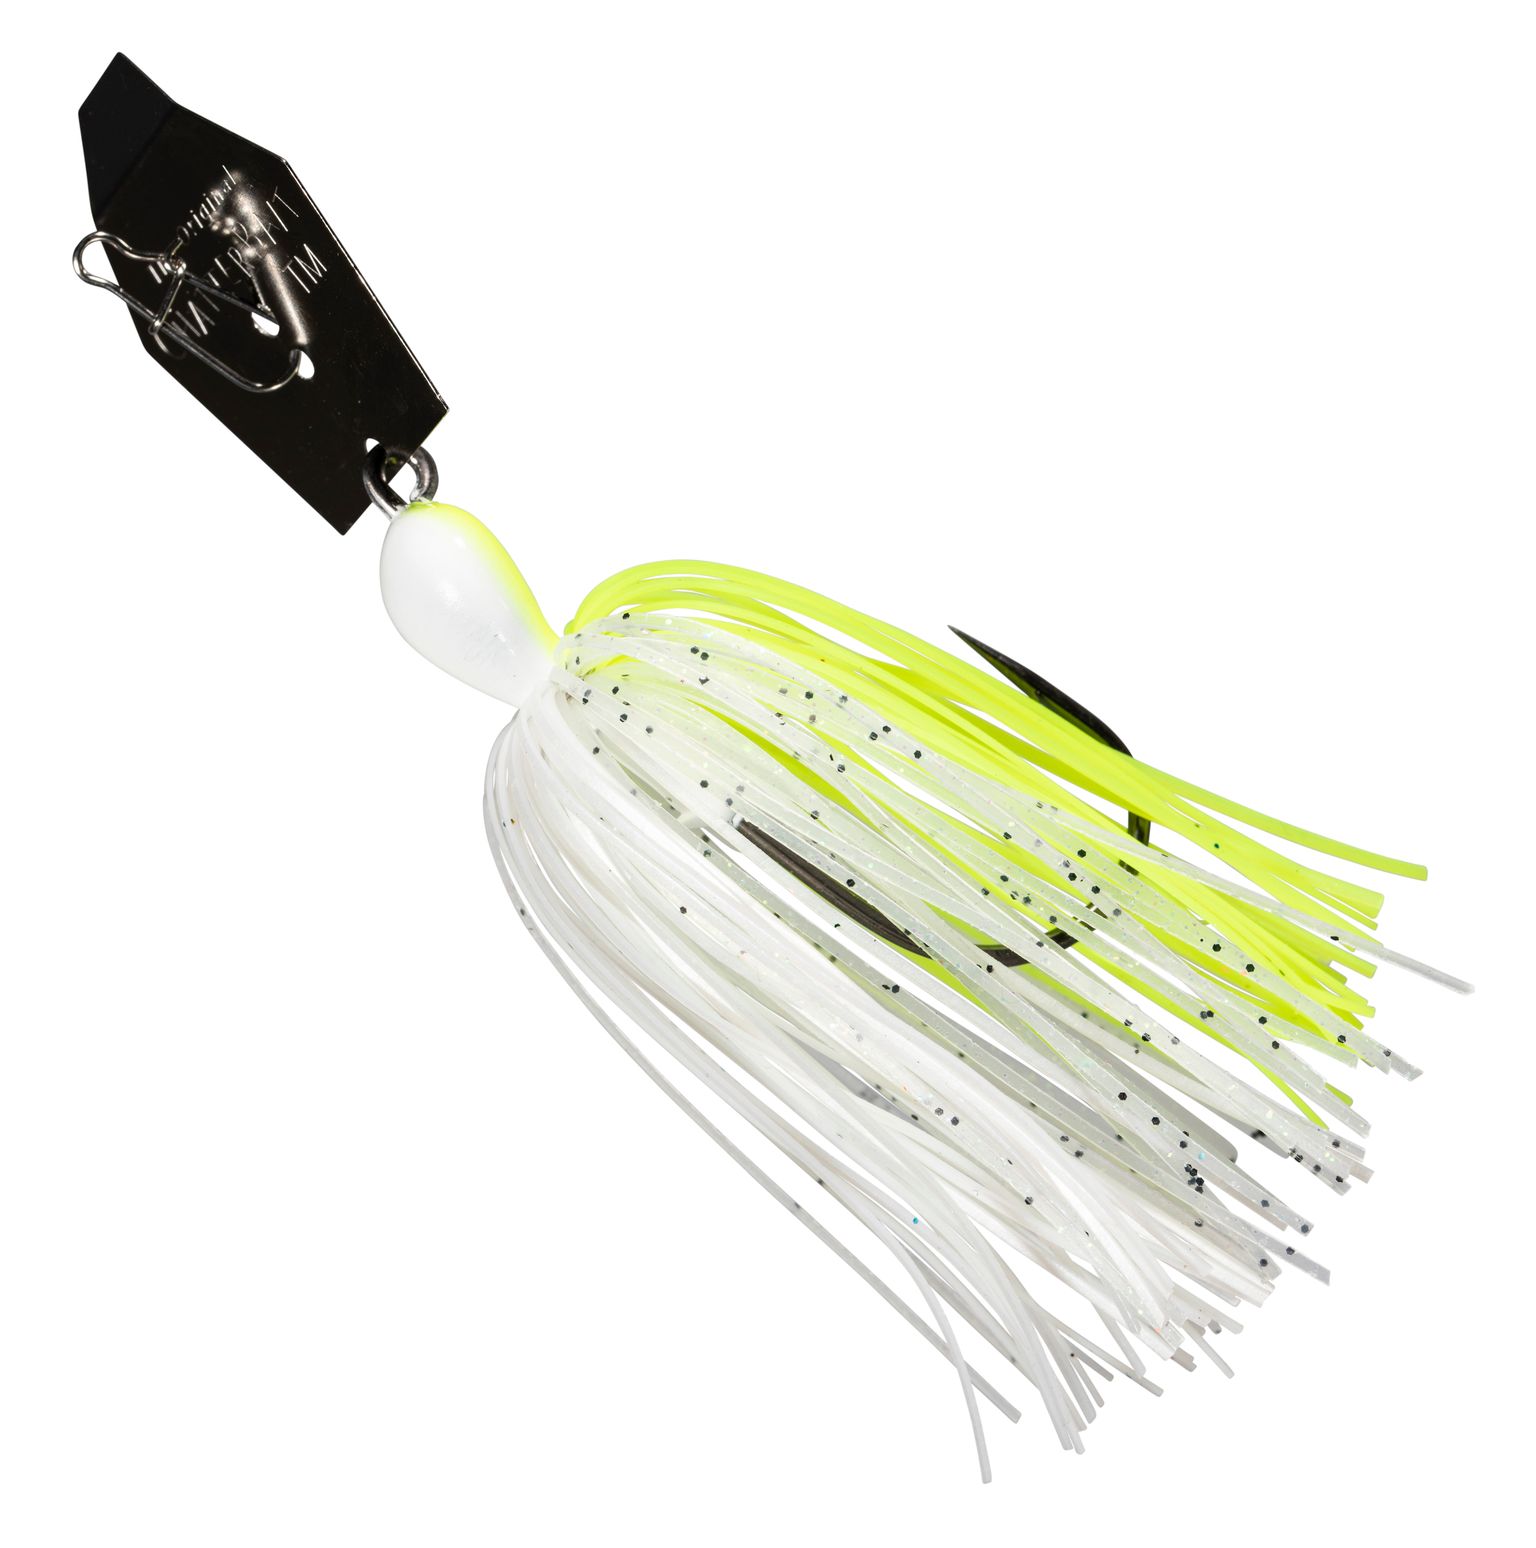 Z-Man Big Blade ChatterBait 1/2, 5/8, or 3/4 oz Oversized Bladed